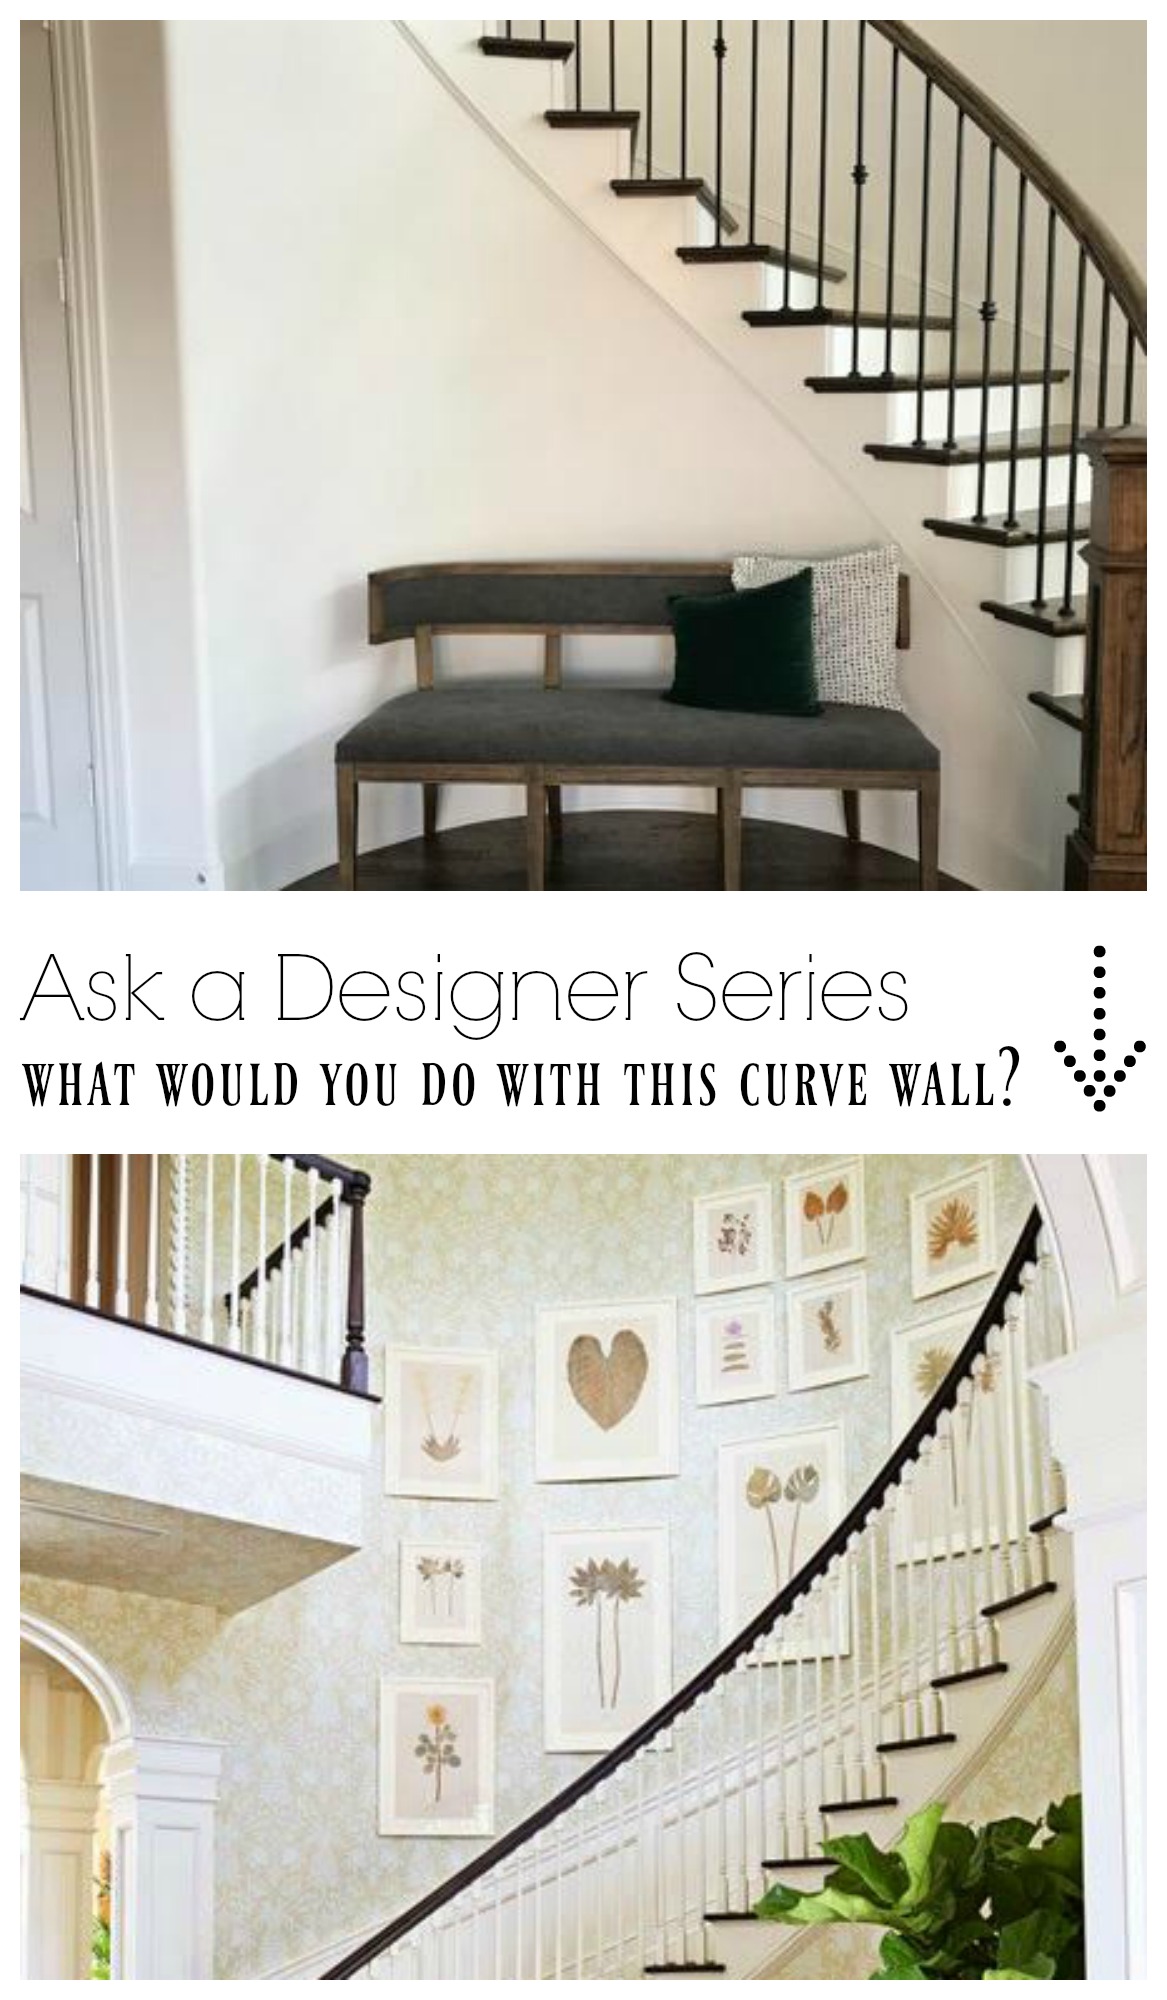 Ask a Designer Series- What do you do with this Curve Wall?